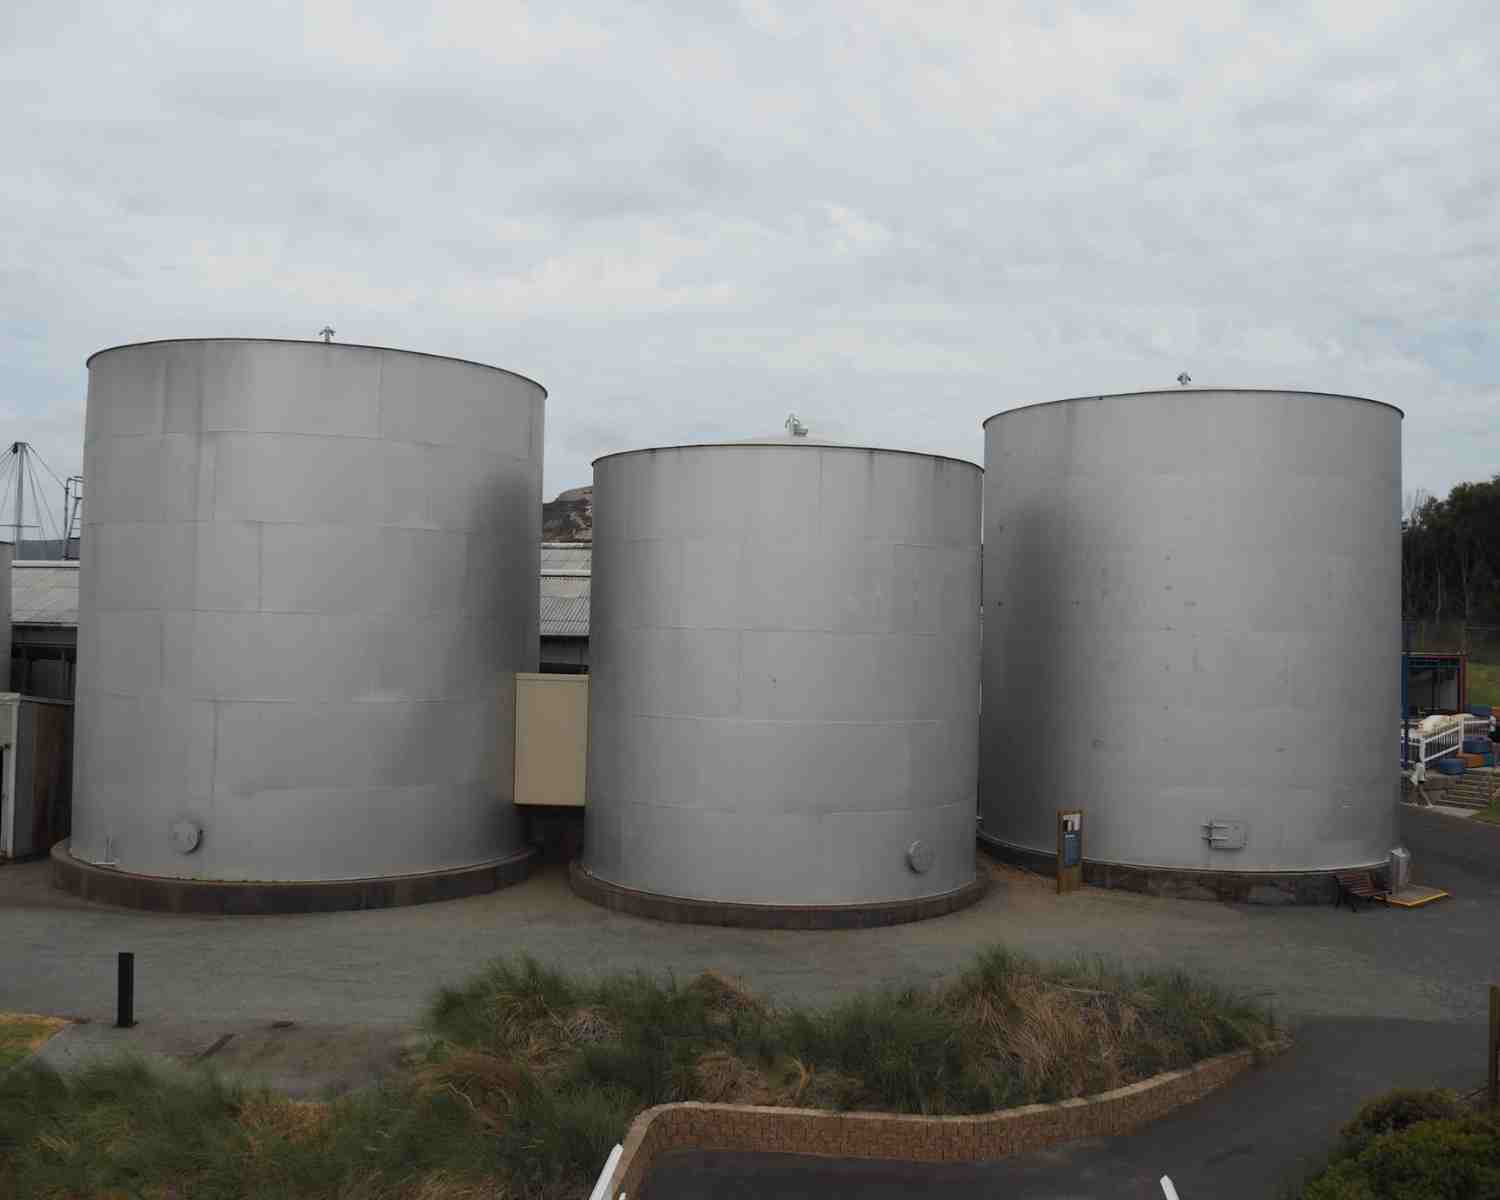 Giant oil tanks at Albany Whaling Station